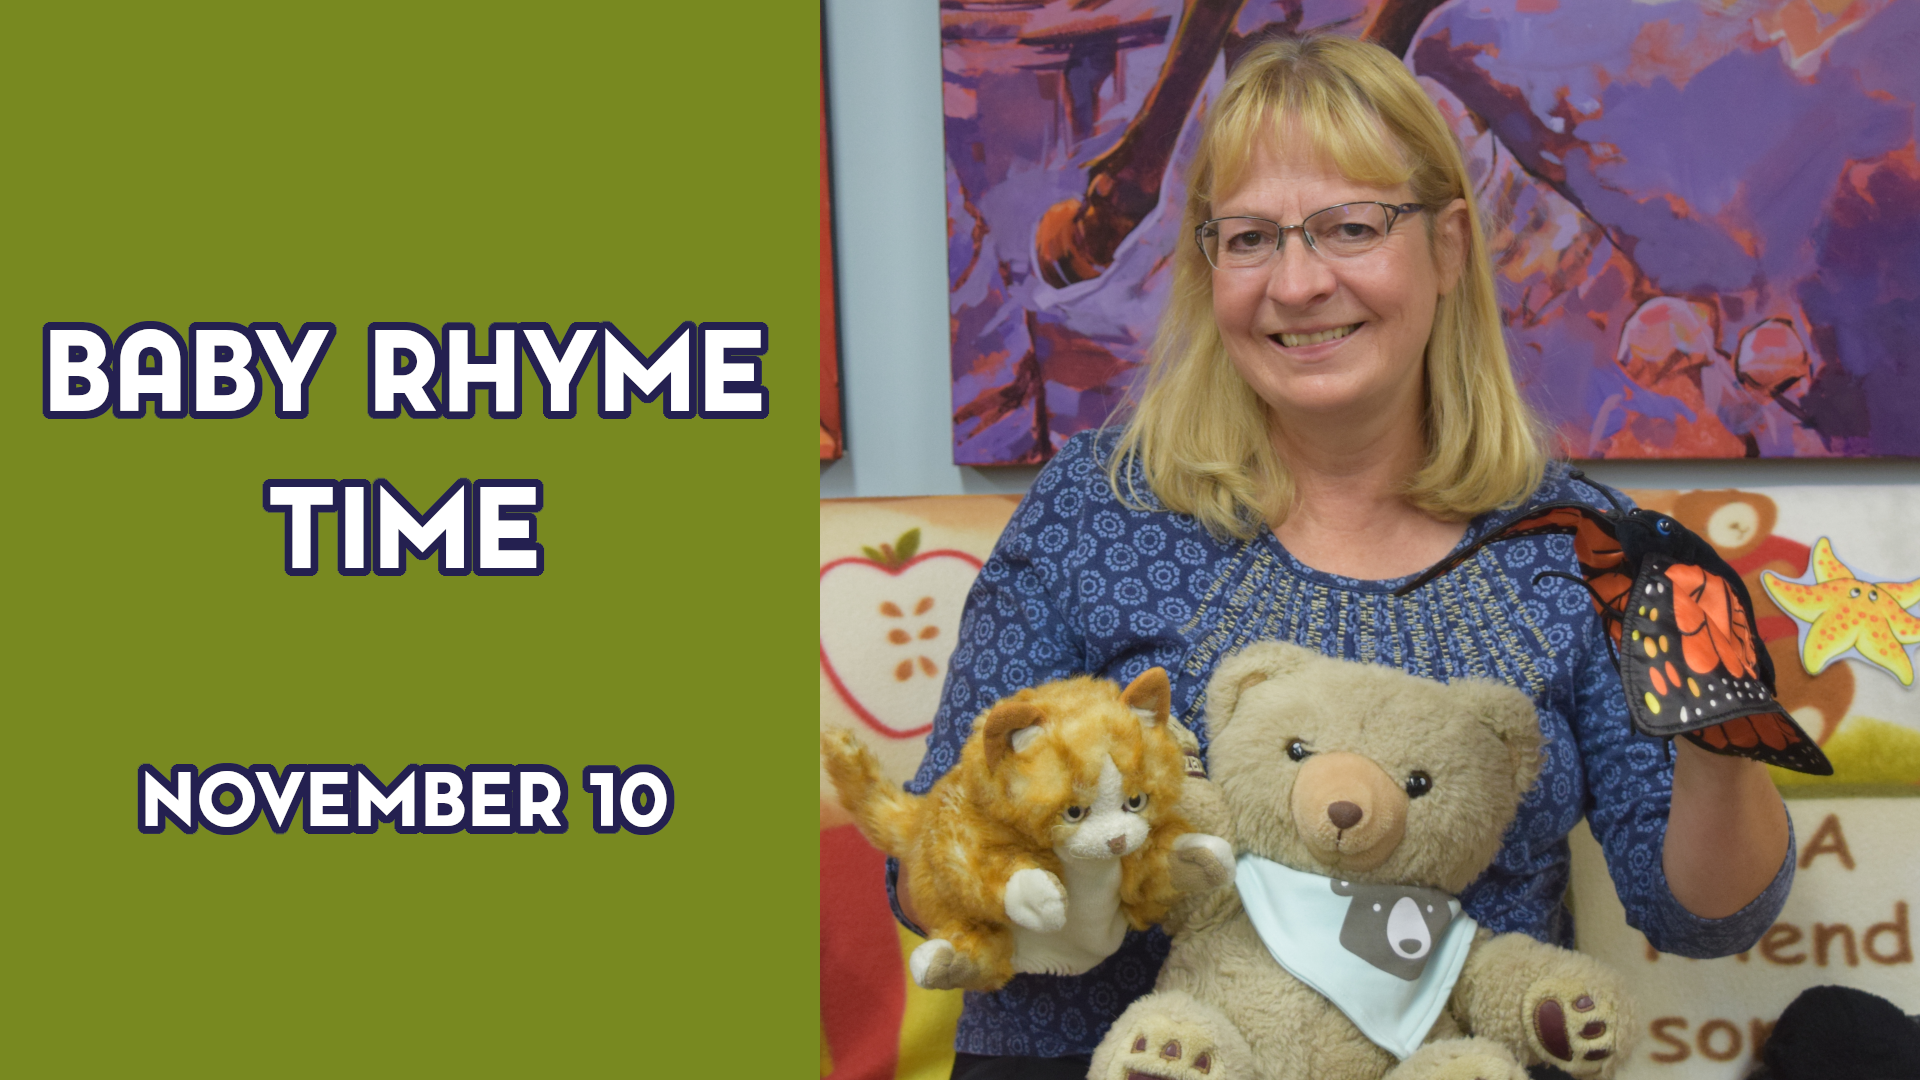 A woman holds stuffed animals next to the text "Baby Rhyme Time November 10"